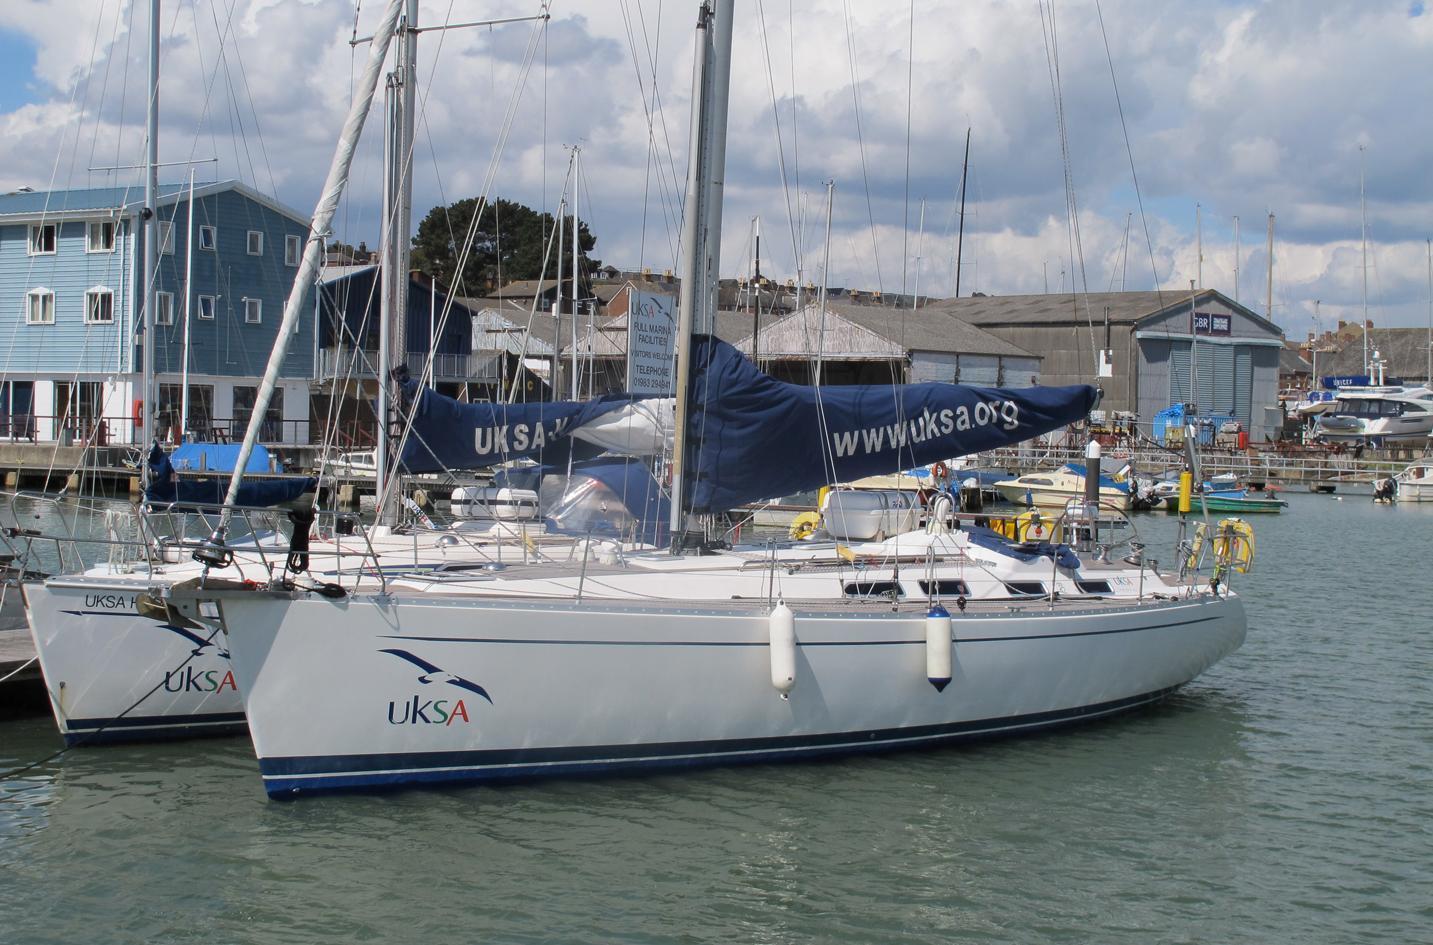 Sweden Yachts 42, Cowes, Isle of Wight